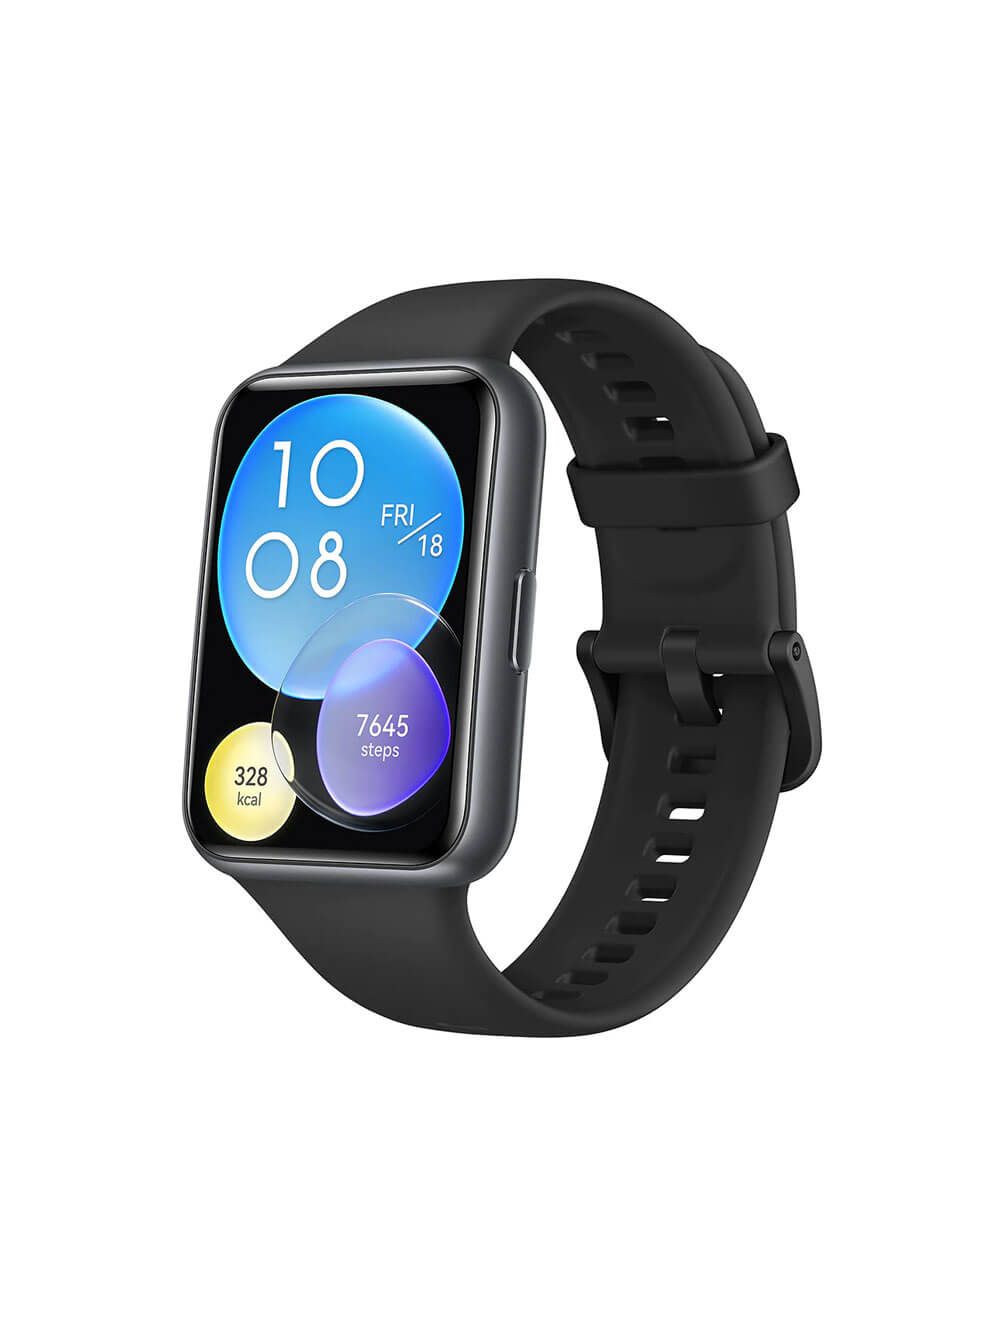 Does the Huawei Band 7 Watch have different sub models? : r/Huawei